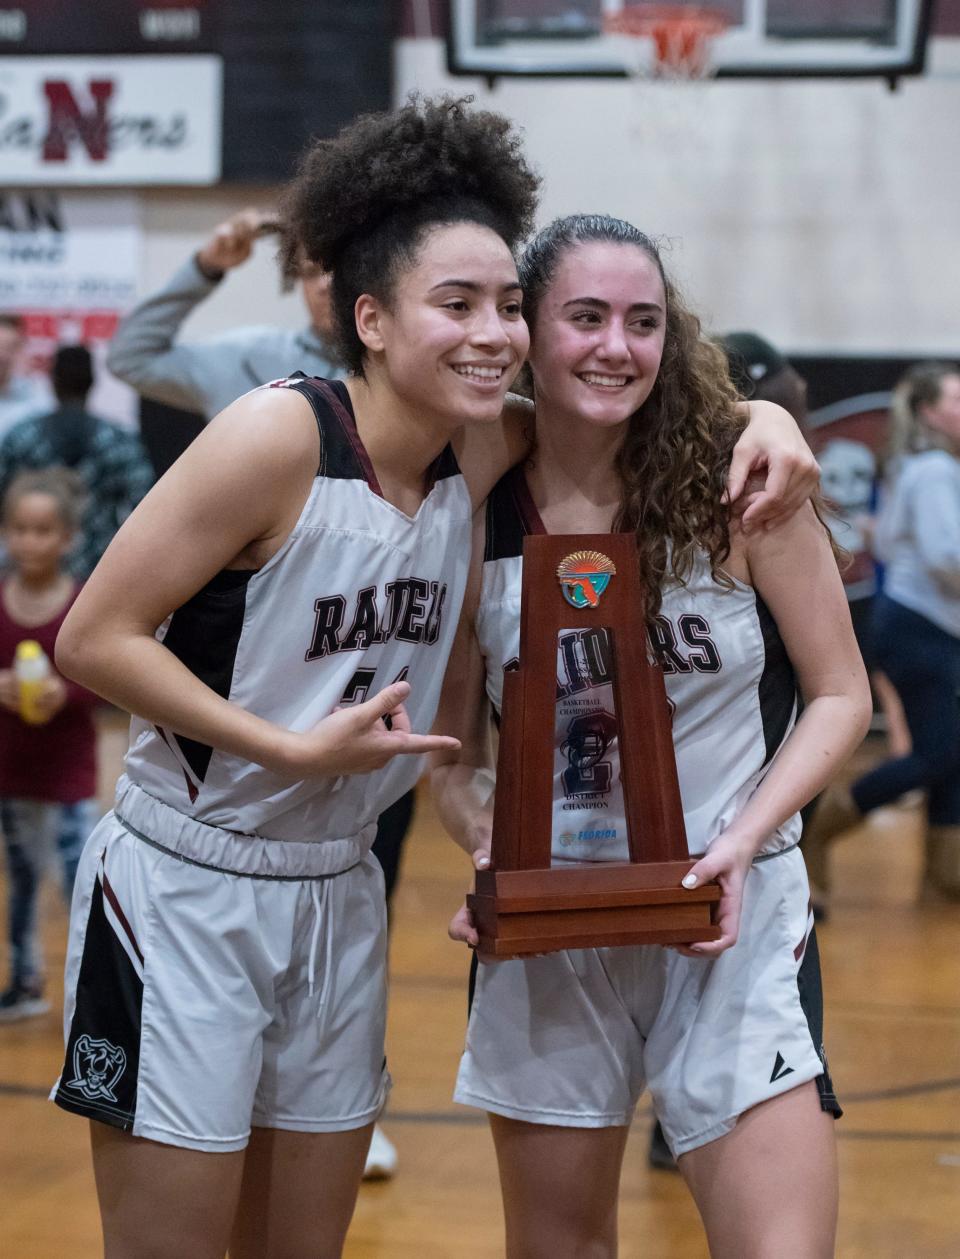 Rachel  Leggett (24) and Micheala Vollmer (23) pose with the trophy after their 52-42 victory in the Pace vs Navarre girls basketball District 1-6A championship game at Navarre High School in Navarre on Friday, Feb. 4, 2022.